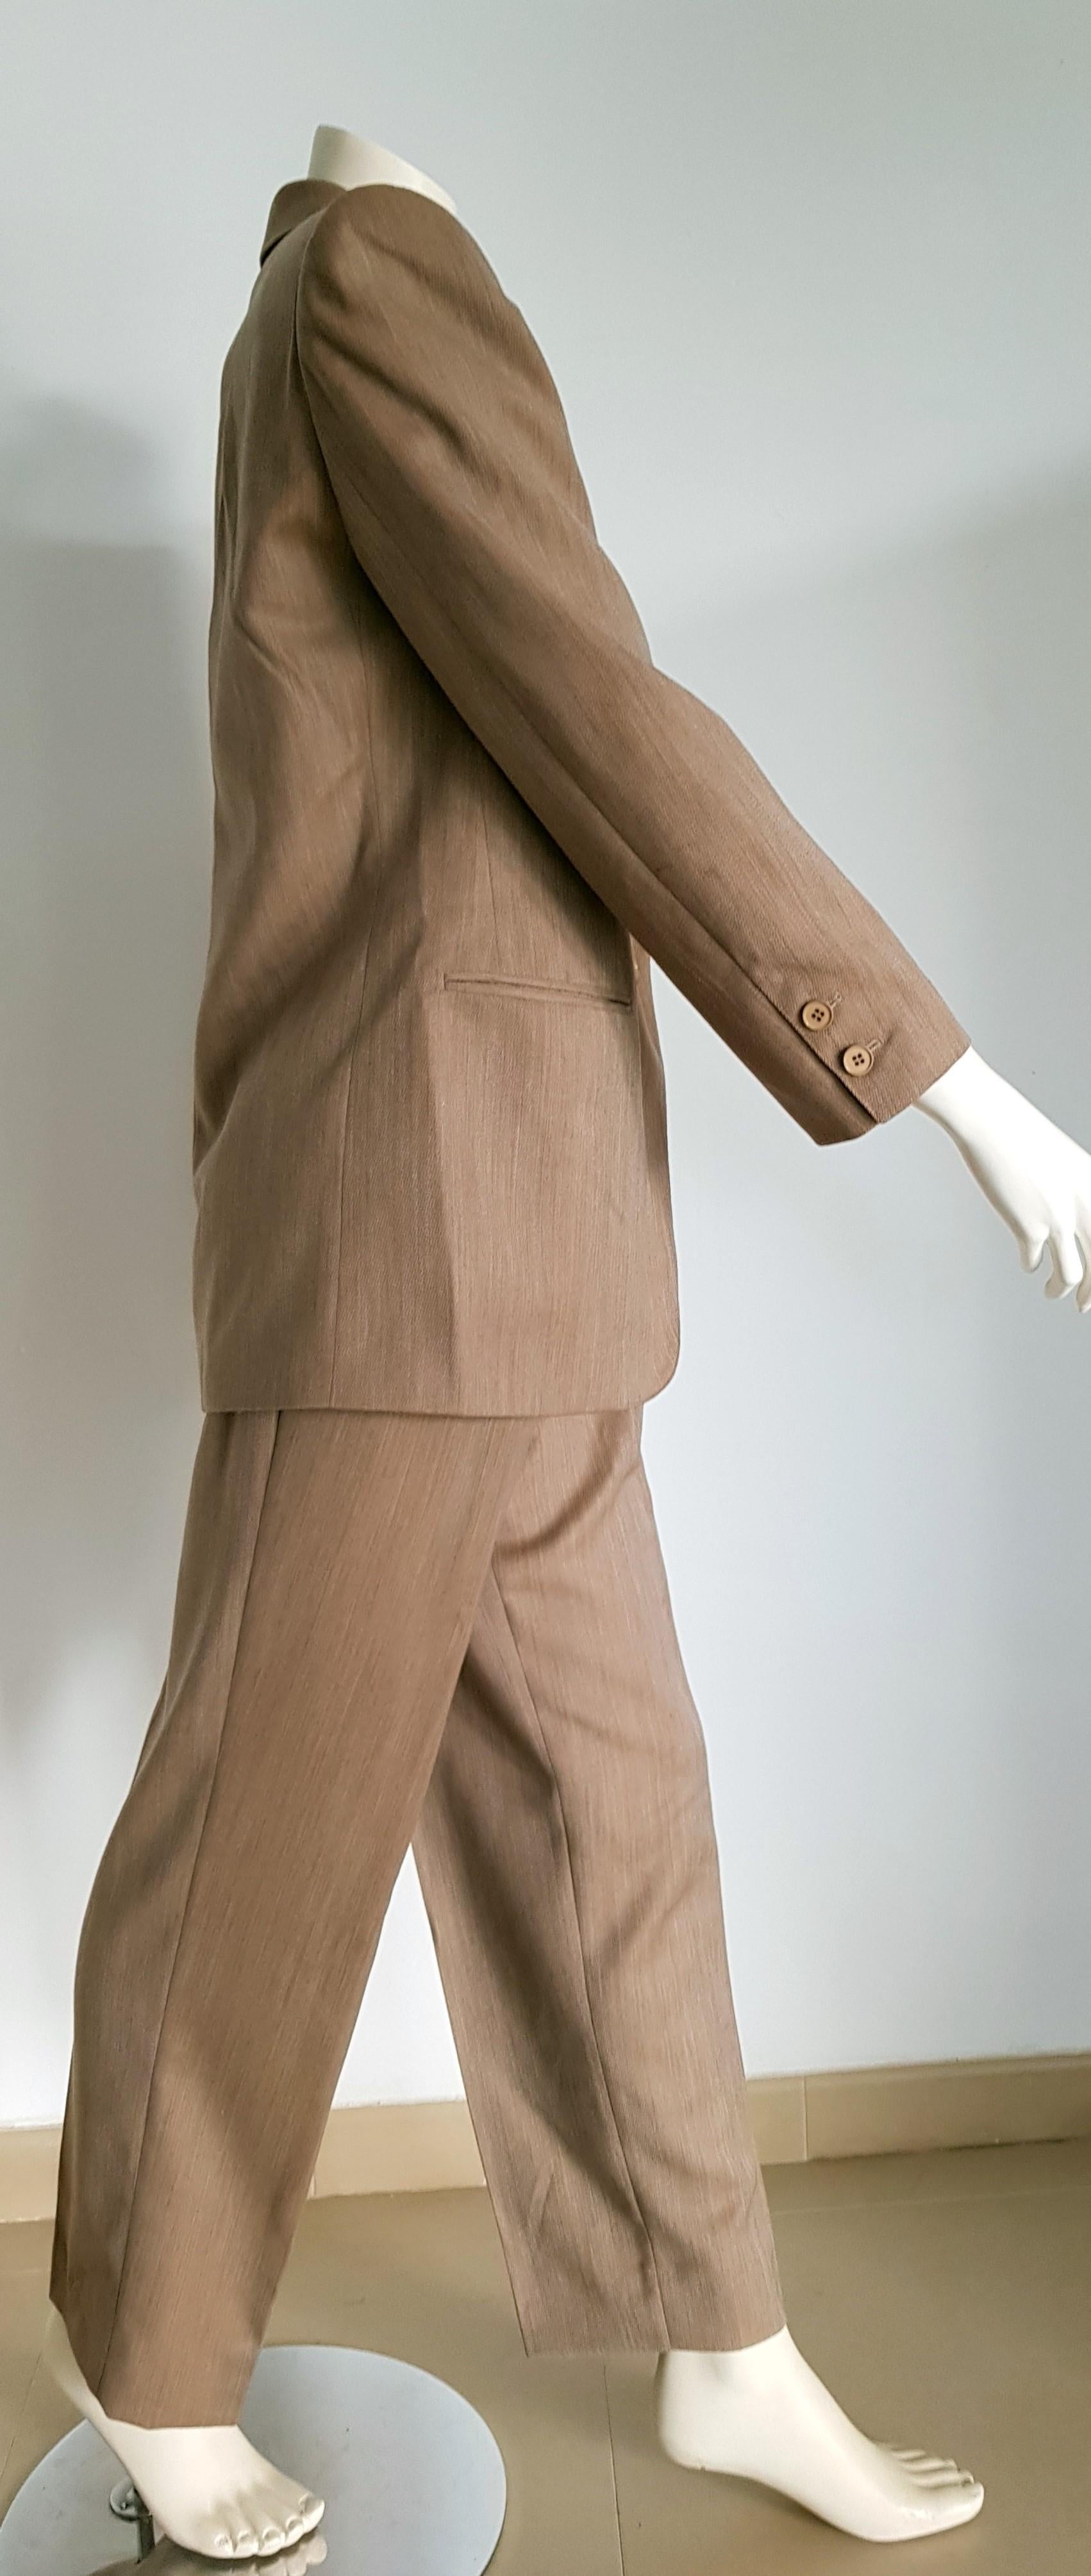 Gianfranco FERRE light brown jacket pants wool suit - Unworn, New
..
SIZE: equivalent to about Small / Medium, please review approx measurements as follows in cm. 
JACKET: lenght 78, chest underarm to underarm 55, bust circumference 98, shoulder